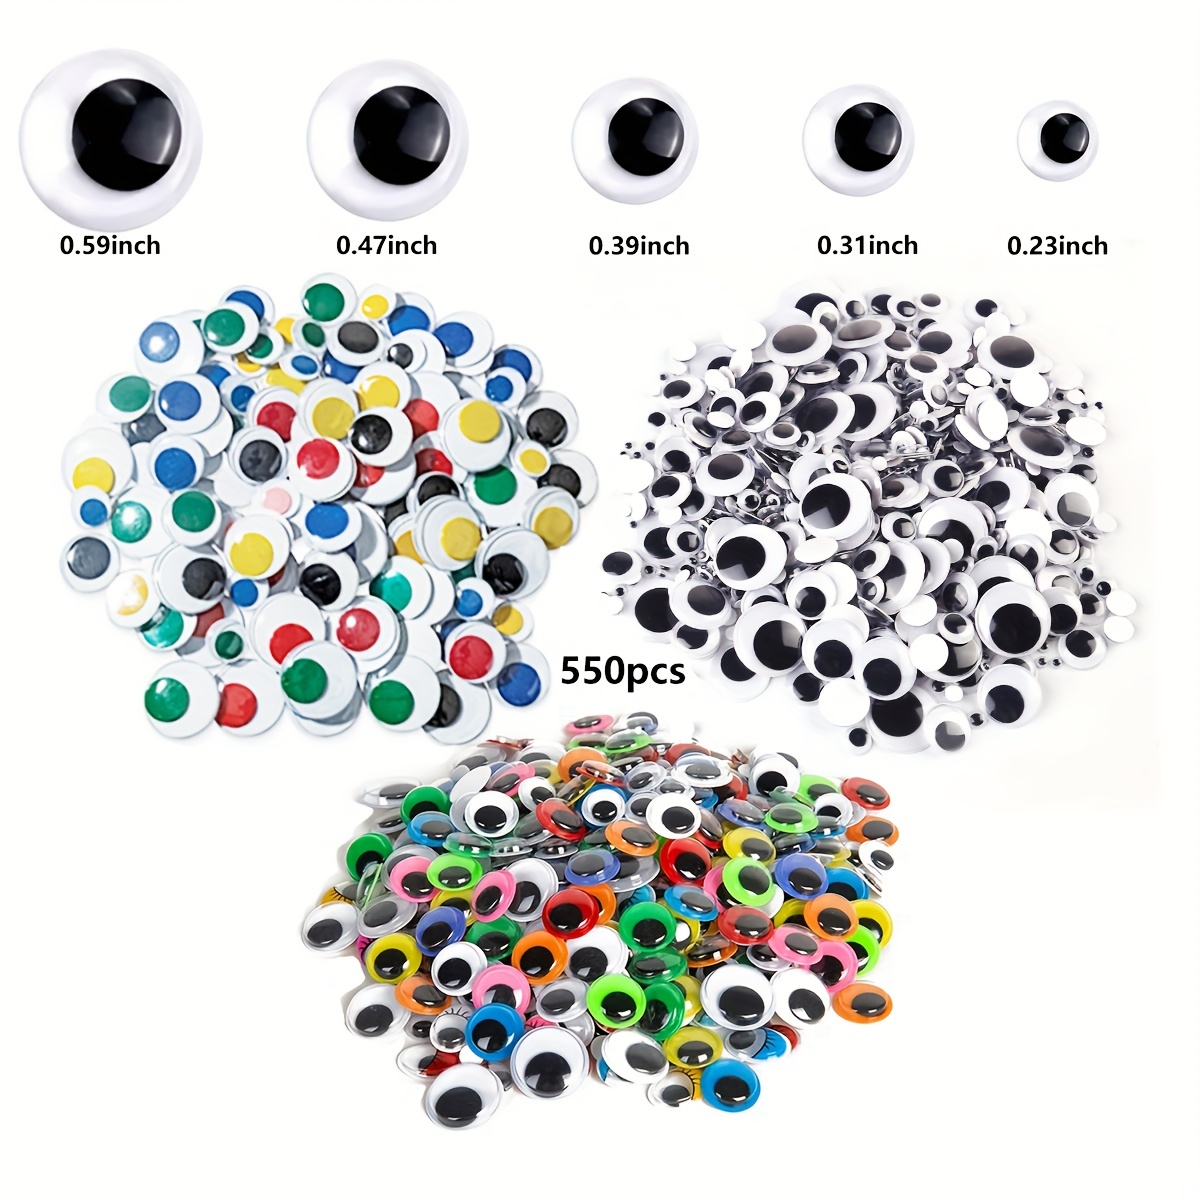 Eye Stickers - Pack of 2,000, Wiggle Eyes